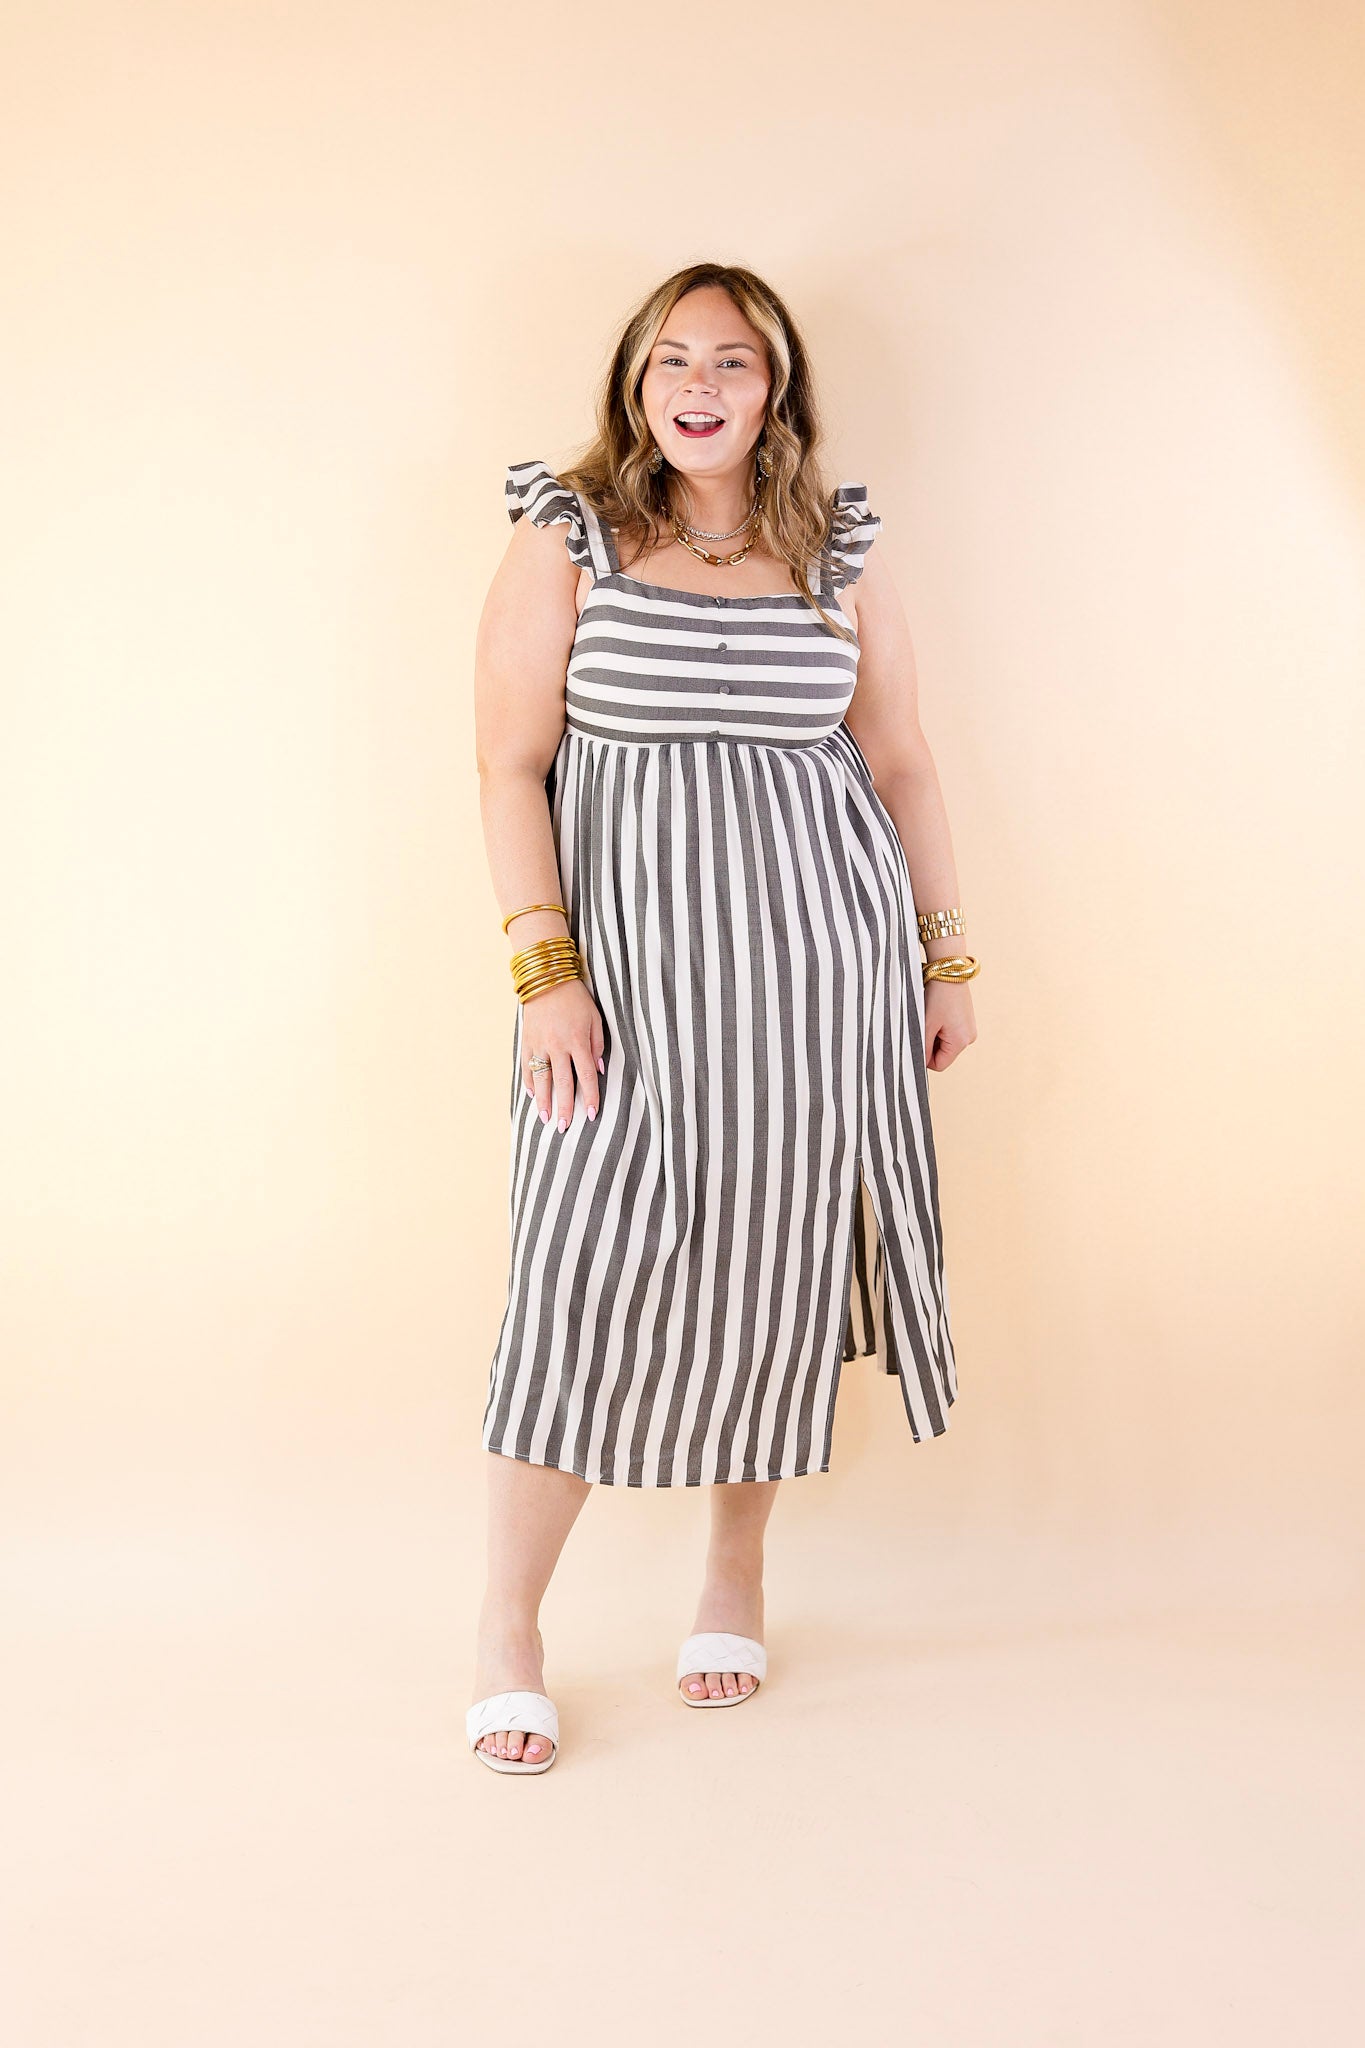 Beach Dreamin Pinstripe Dress in Grey and White - Giddy Up Glamour Boutique